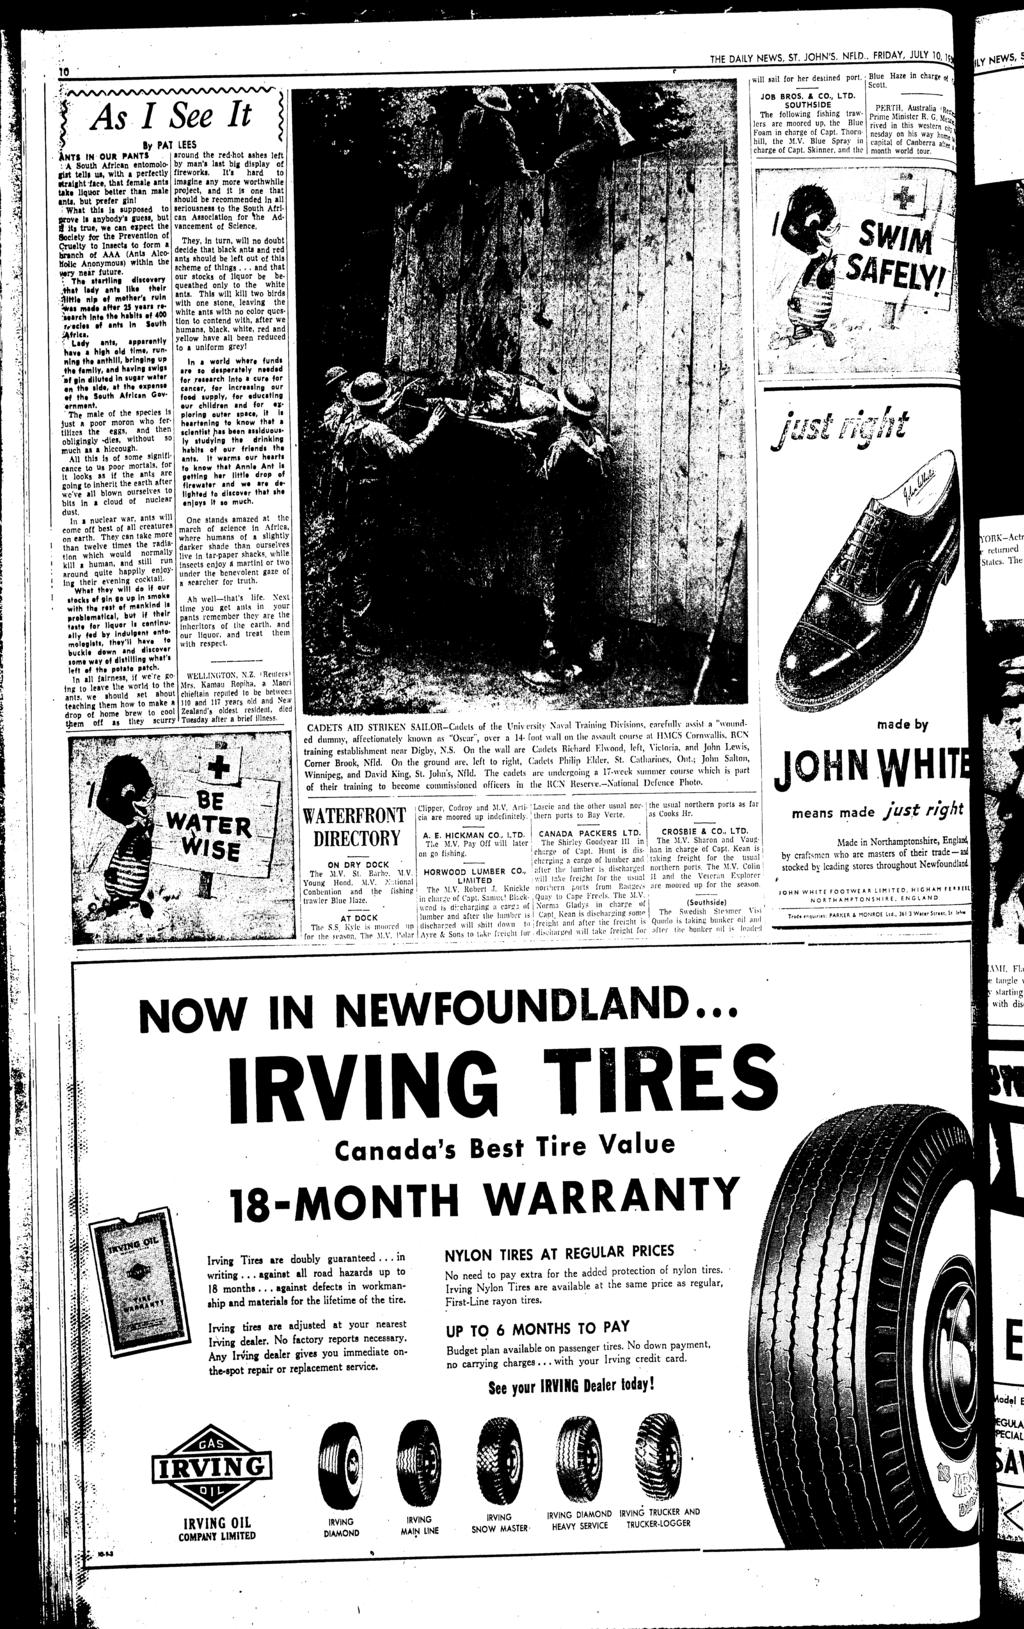 THE DAilY NEWS ST JOHN'S NFlD FRDAY JULY 1 10 will &ail for her de&tined port Blue Haze n chargp oj Scott _ f;'vvv'\ ~'r'roul'''''''''''''' ''O'O~ JOB BROS & CO LTD 1 As See t SOUTHSDE PERT Australia